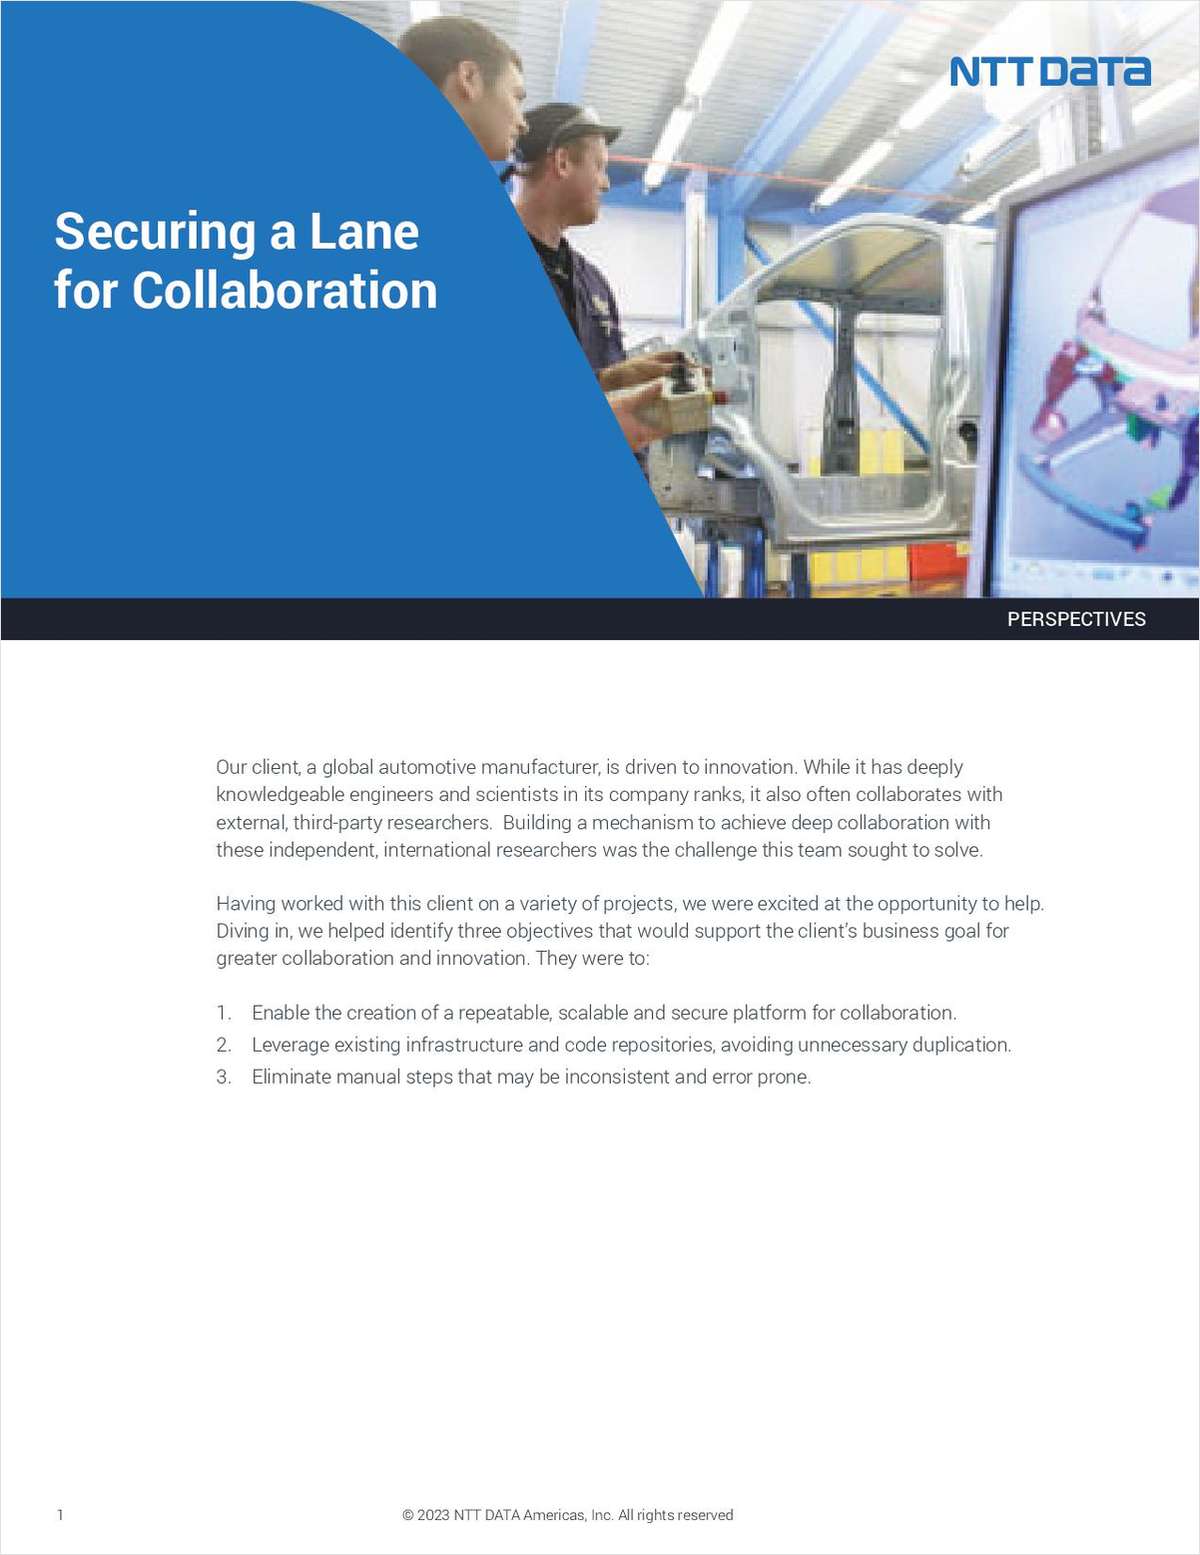 Securing a Lane for Collaboration